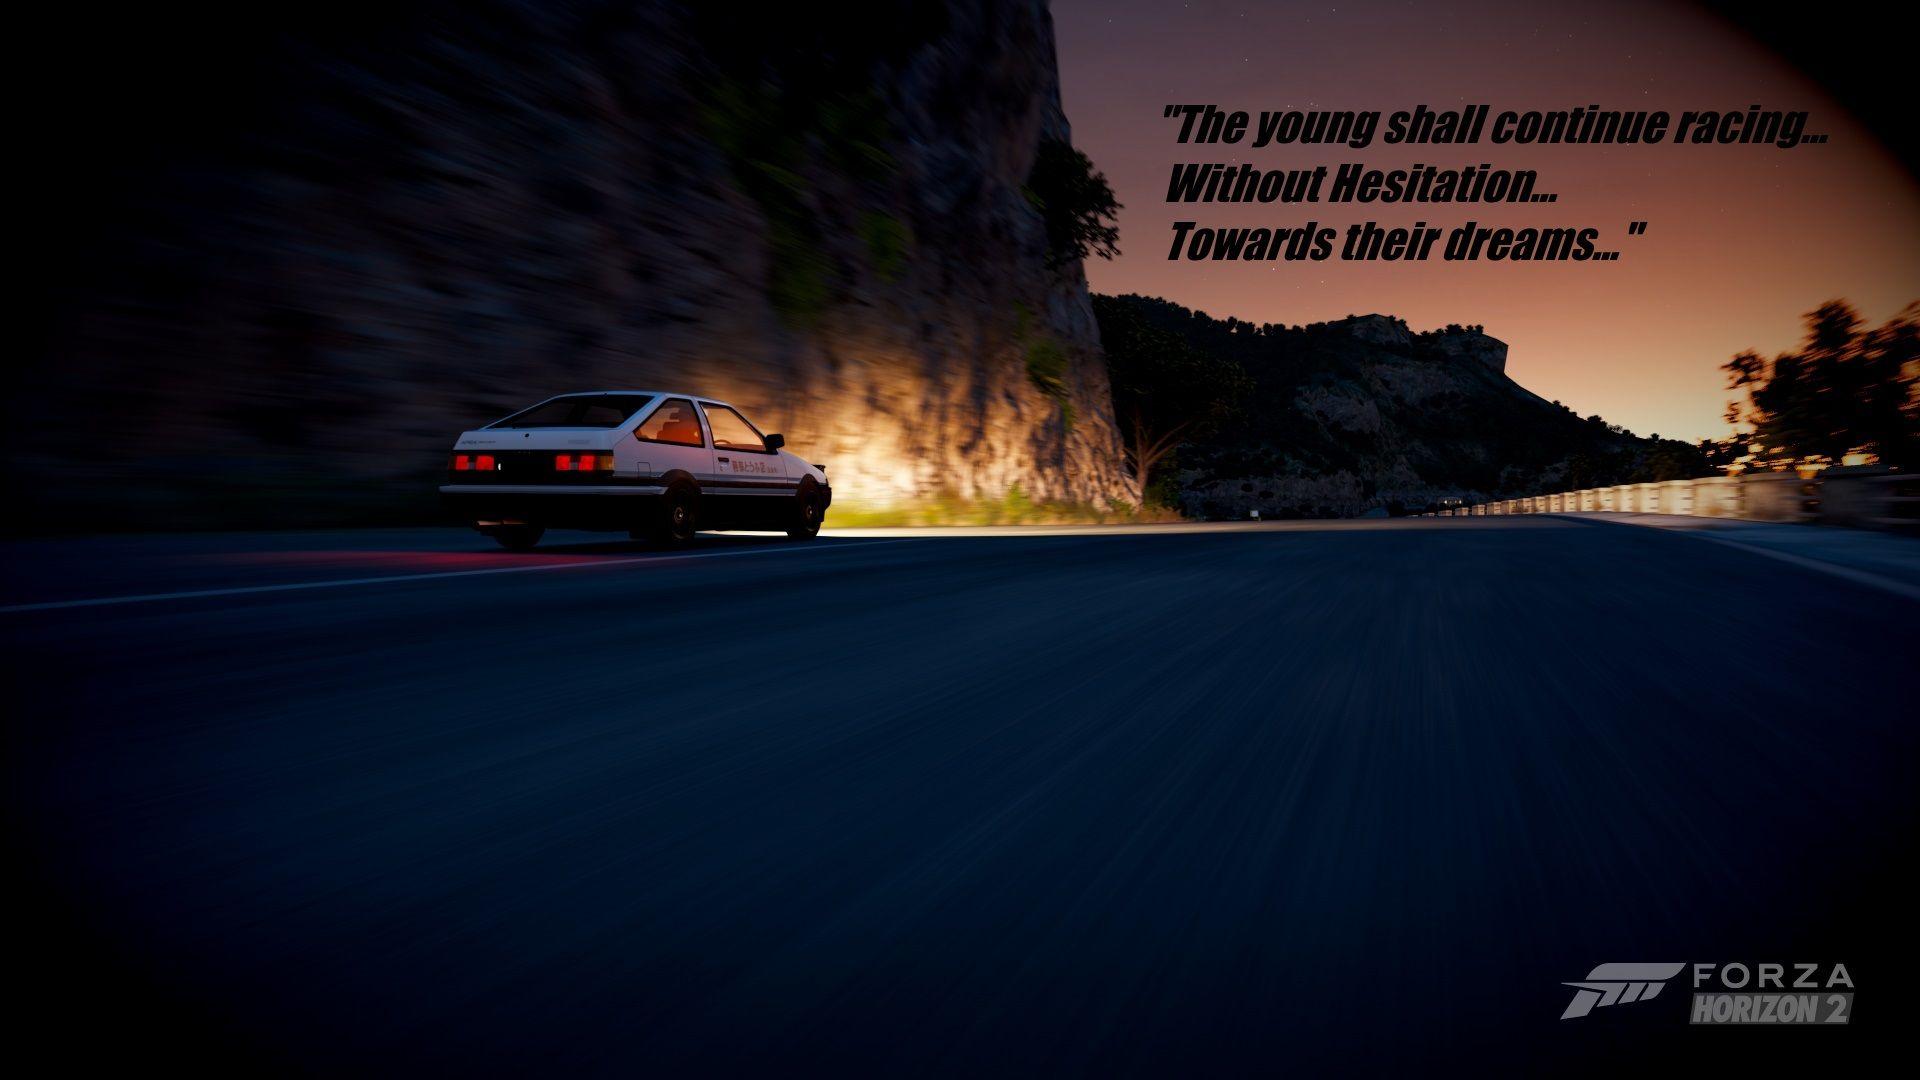 I was sick of looking for wallpaper, so I made my own in Forza